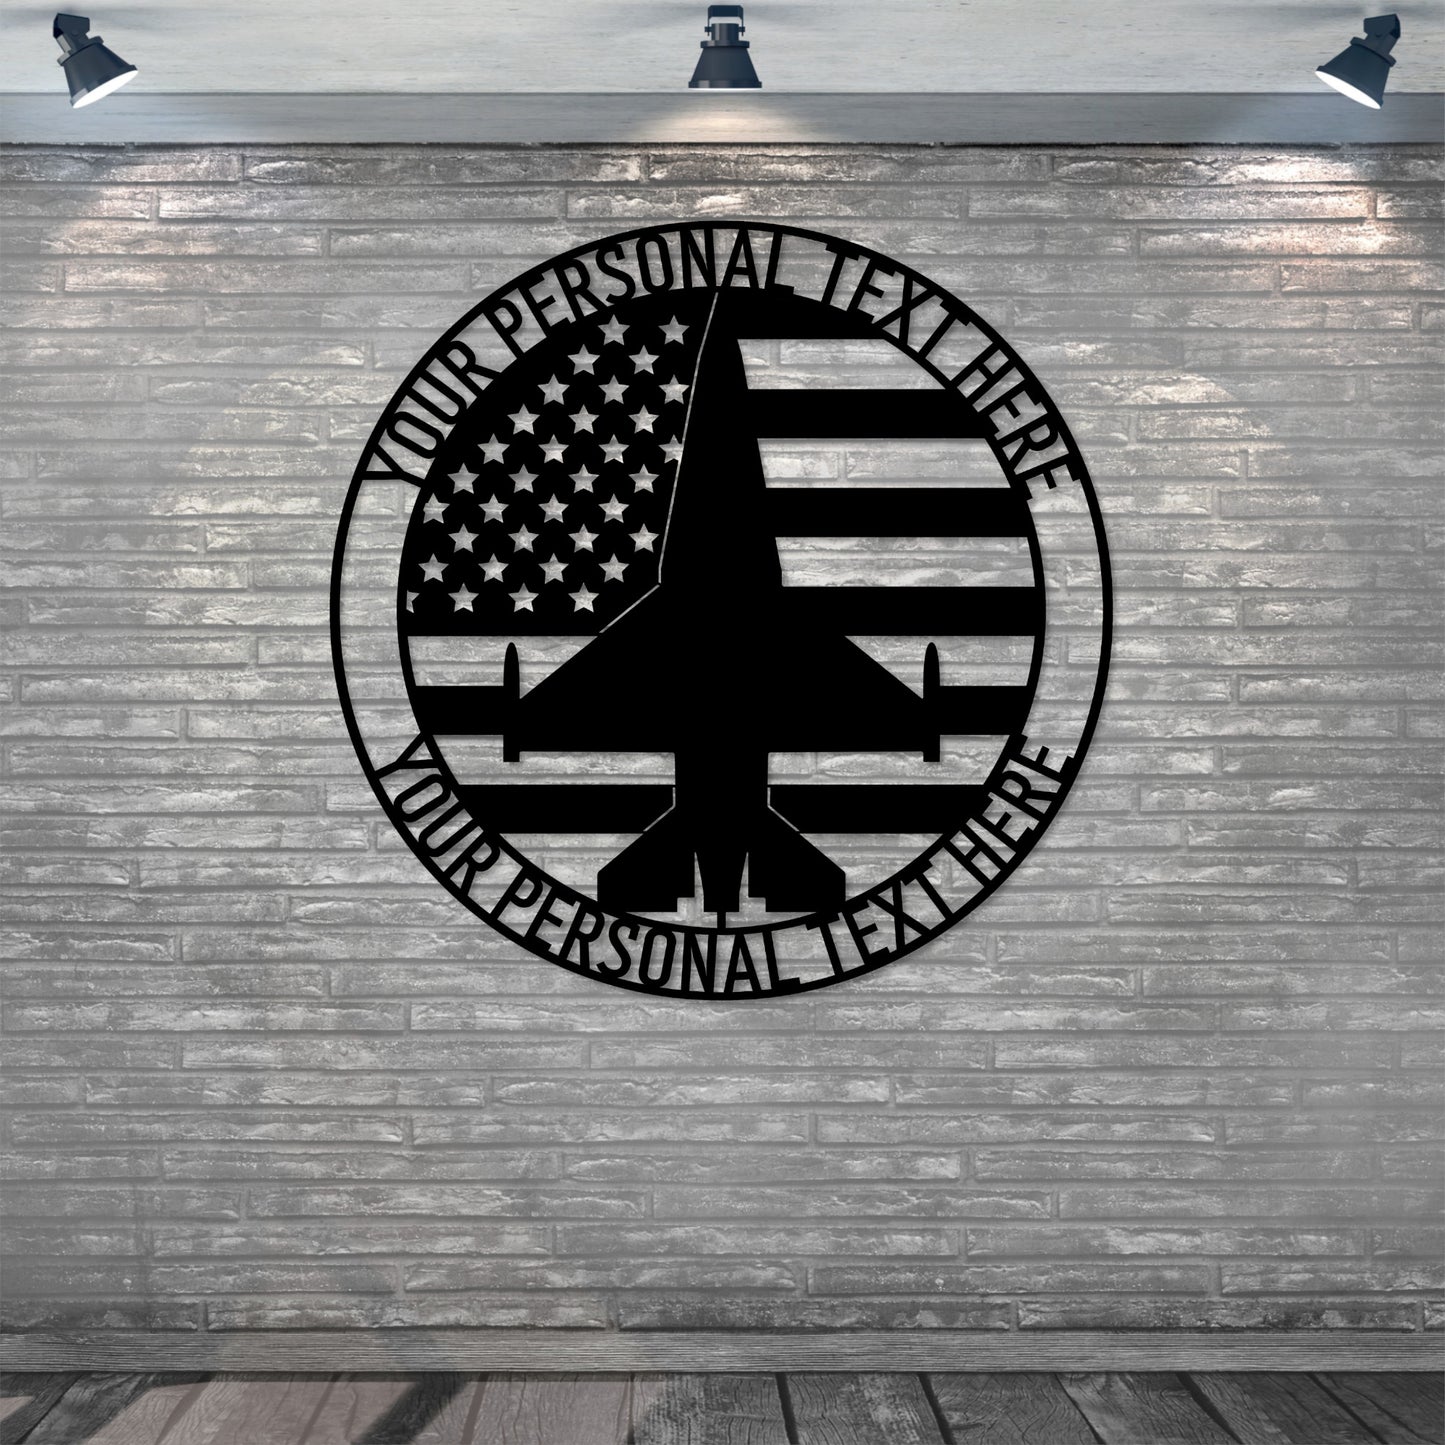 Personalized American Fighter Pilot Metal Sign. Custom Jet Fighter Wall Decor Gift. Army Veteran Retirement. Air Force Military Decor Gift